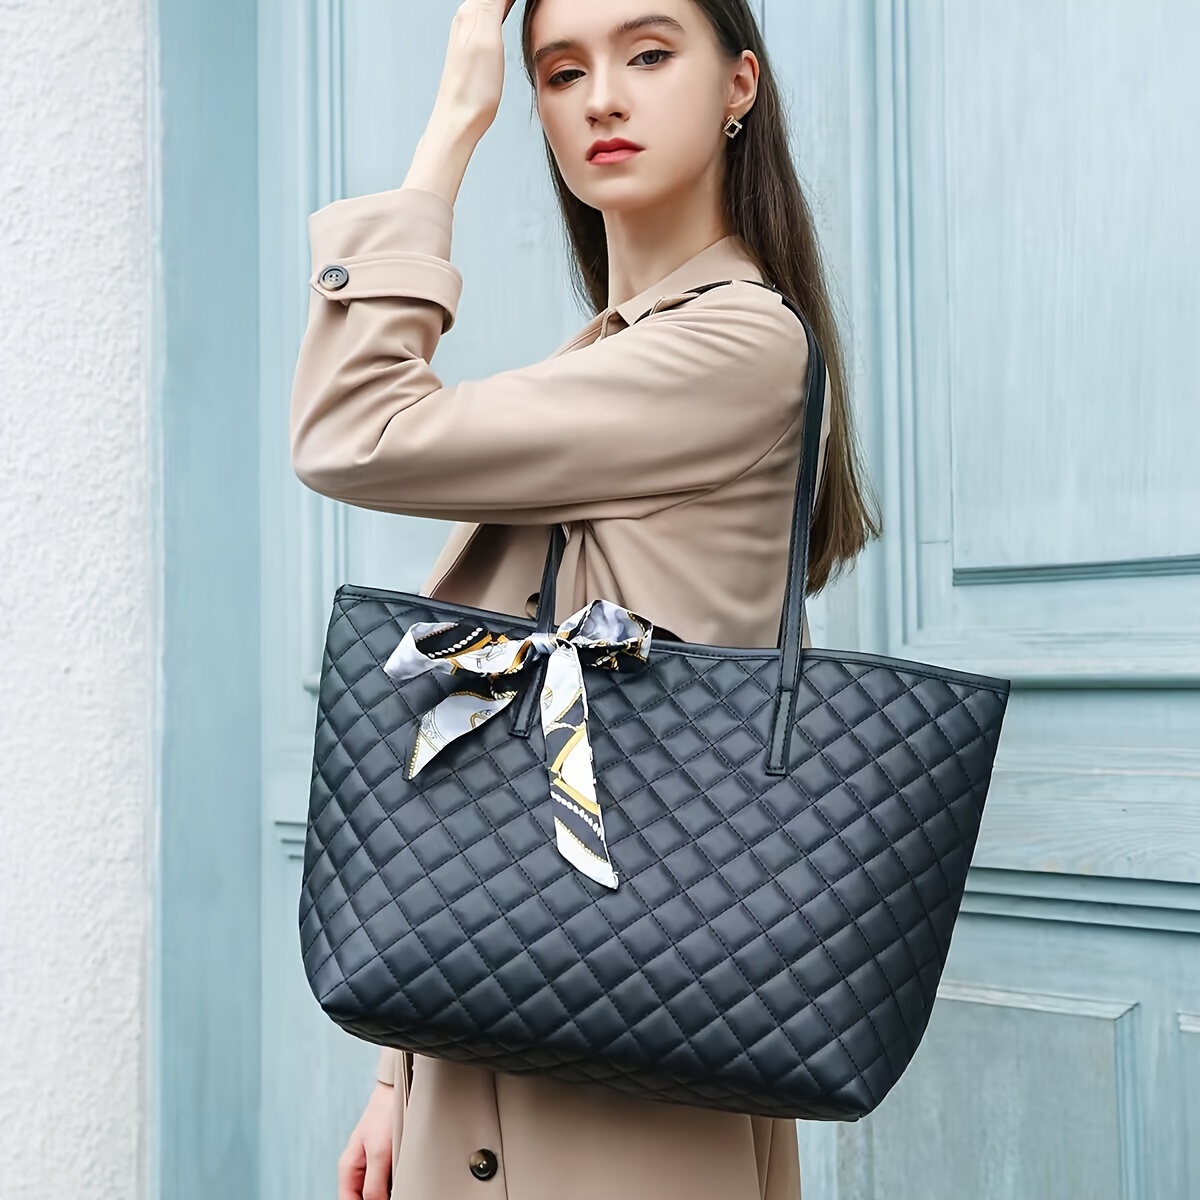 

Large Capacity Ladies Tote Handbag With Embroidered Quilted Design, Elegant Commuter Pu Shoulder Bag, Simple Underarm Carry Bag